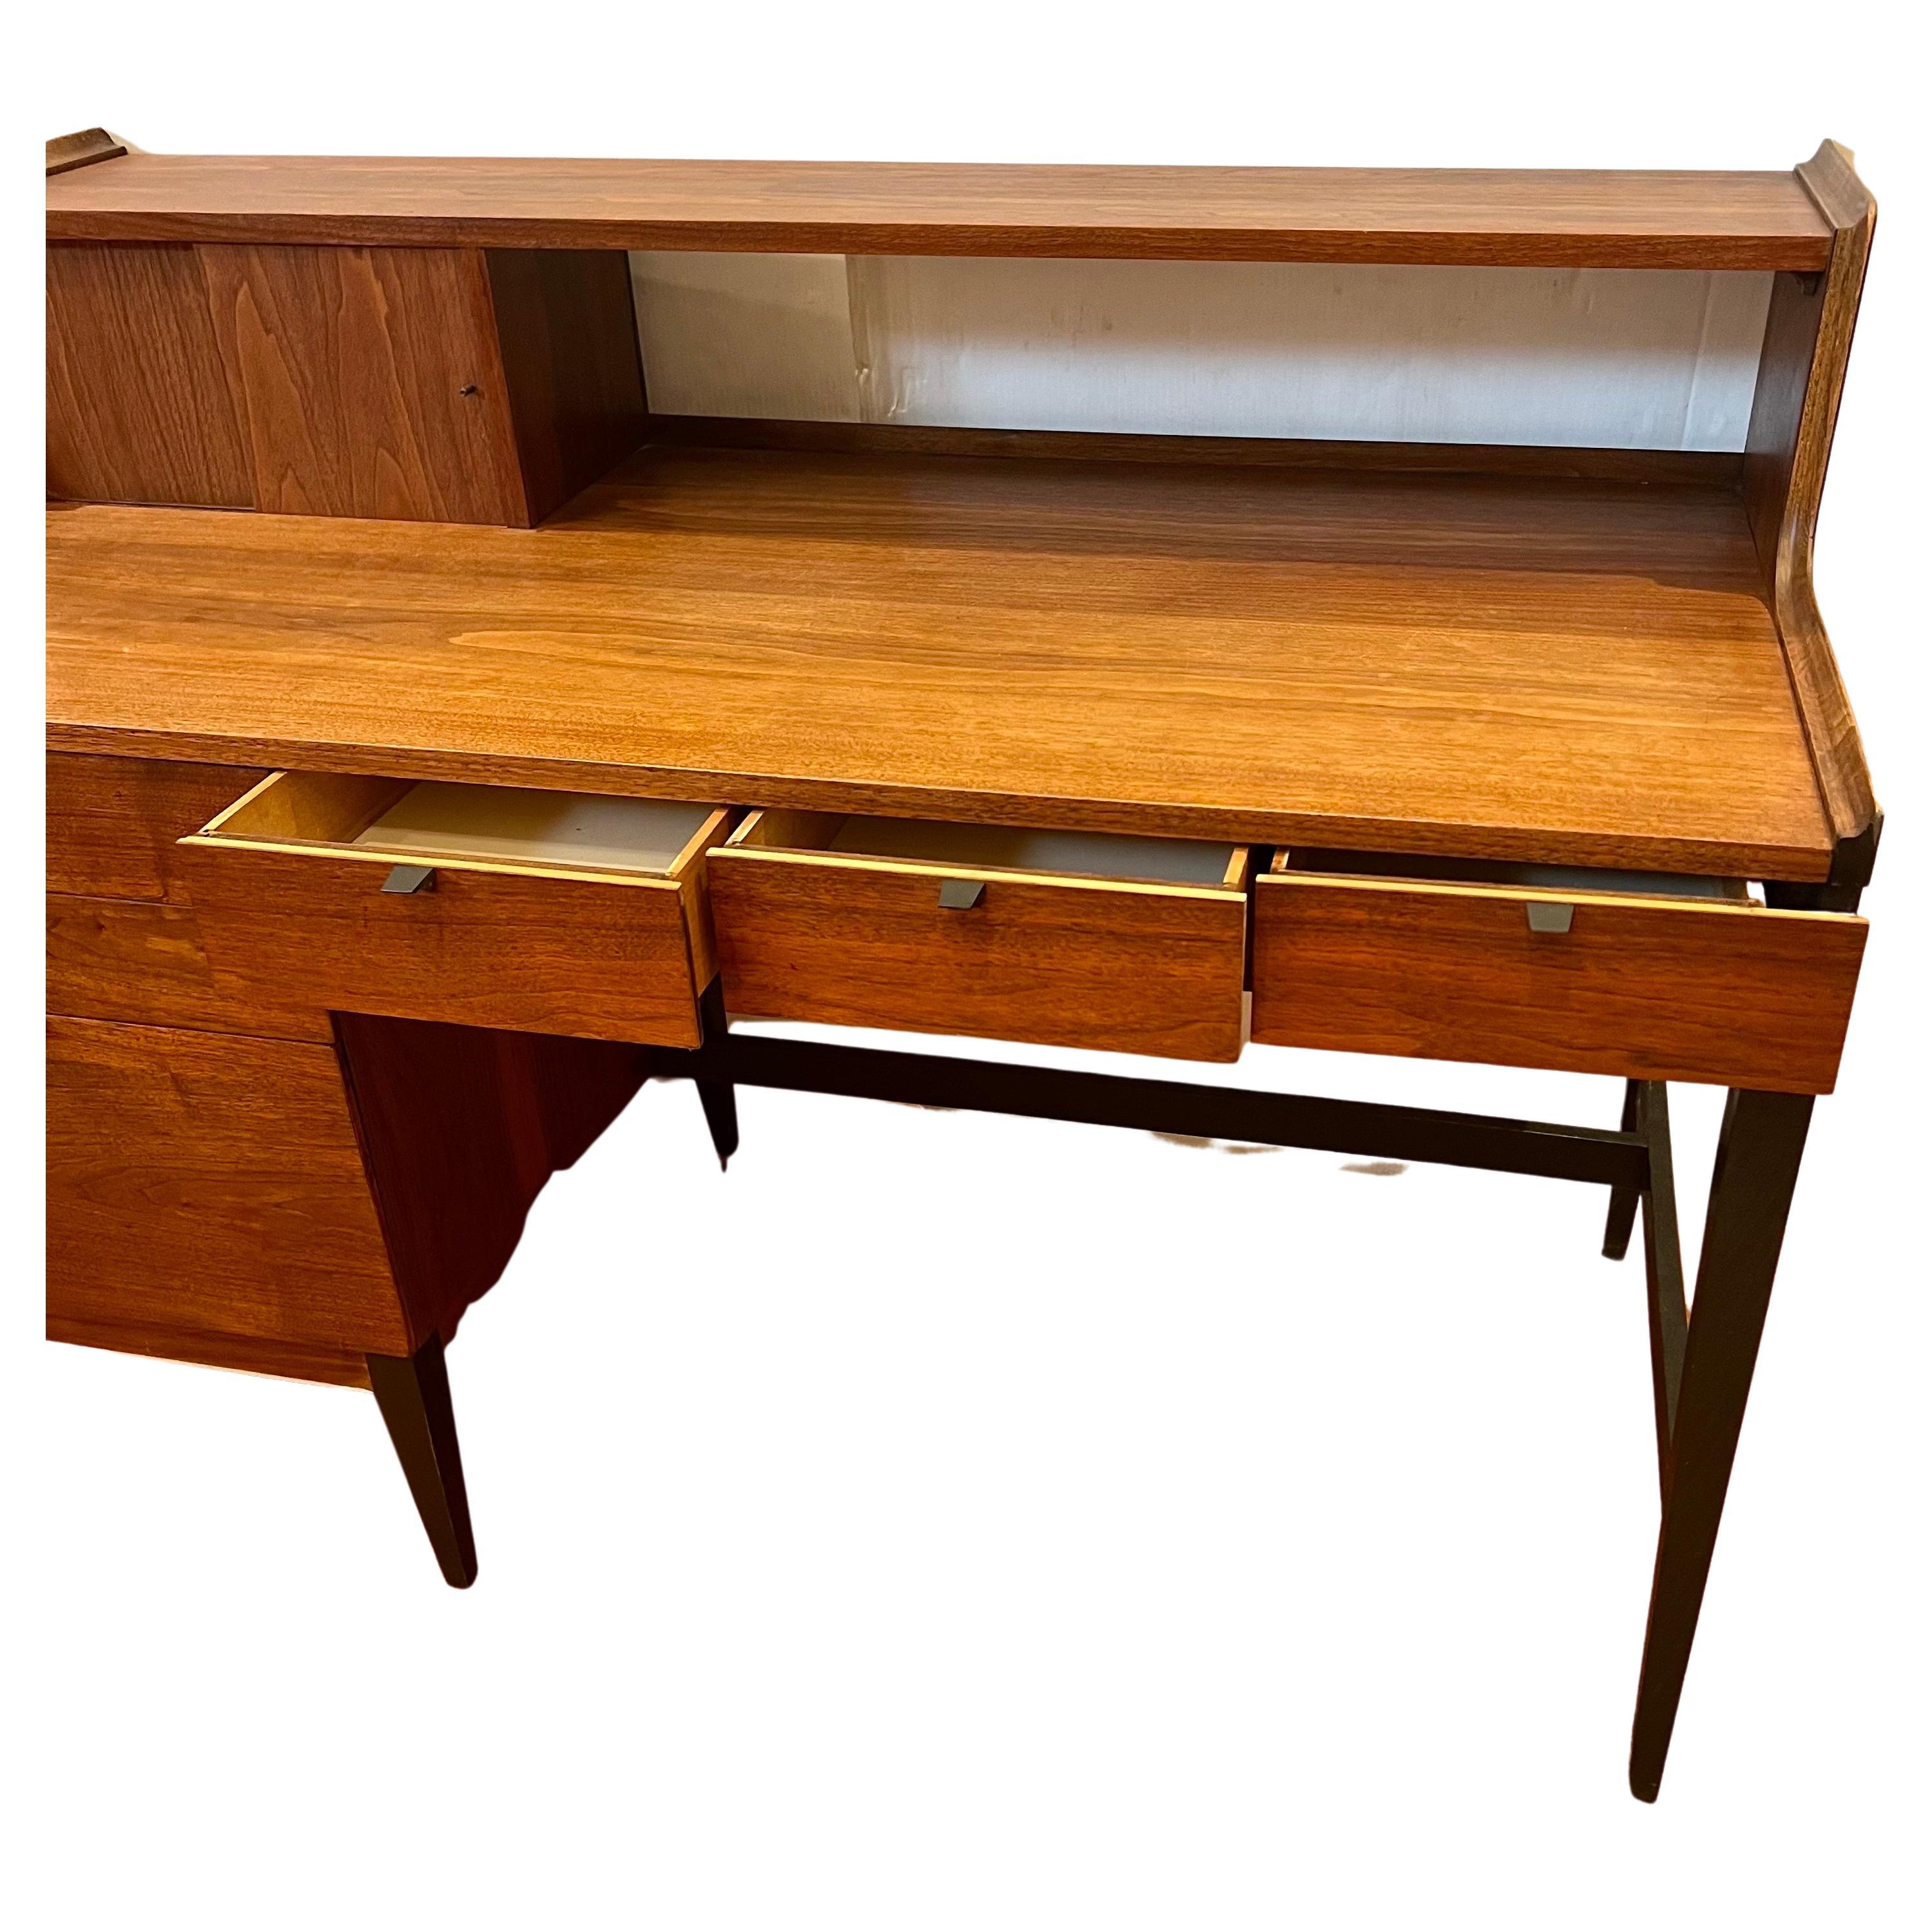 Beautiful and rare tall desk secretaire by Cavalier designed by Arthur Umanoff, circa 1950's in walnut finish with black lacquer accents, freshly refinished lost of storage plenty of drawers, hard to find.